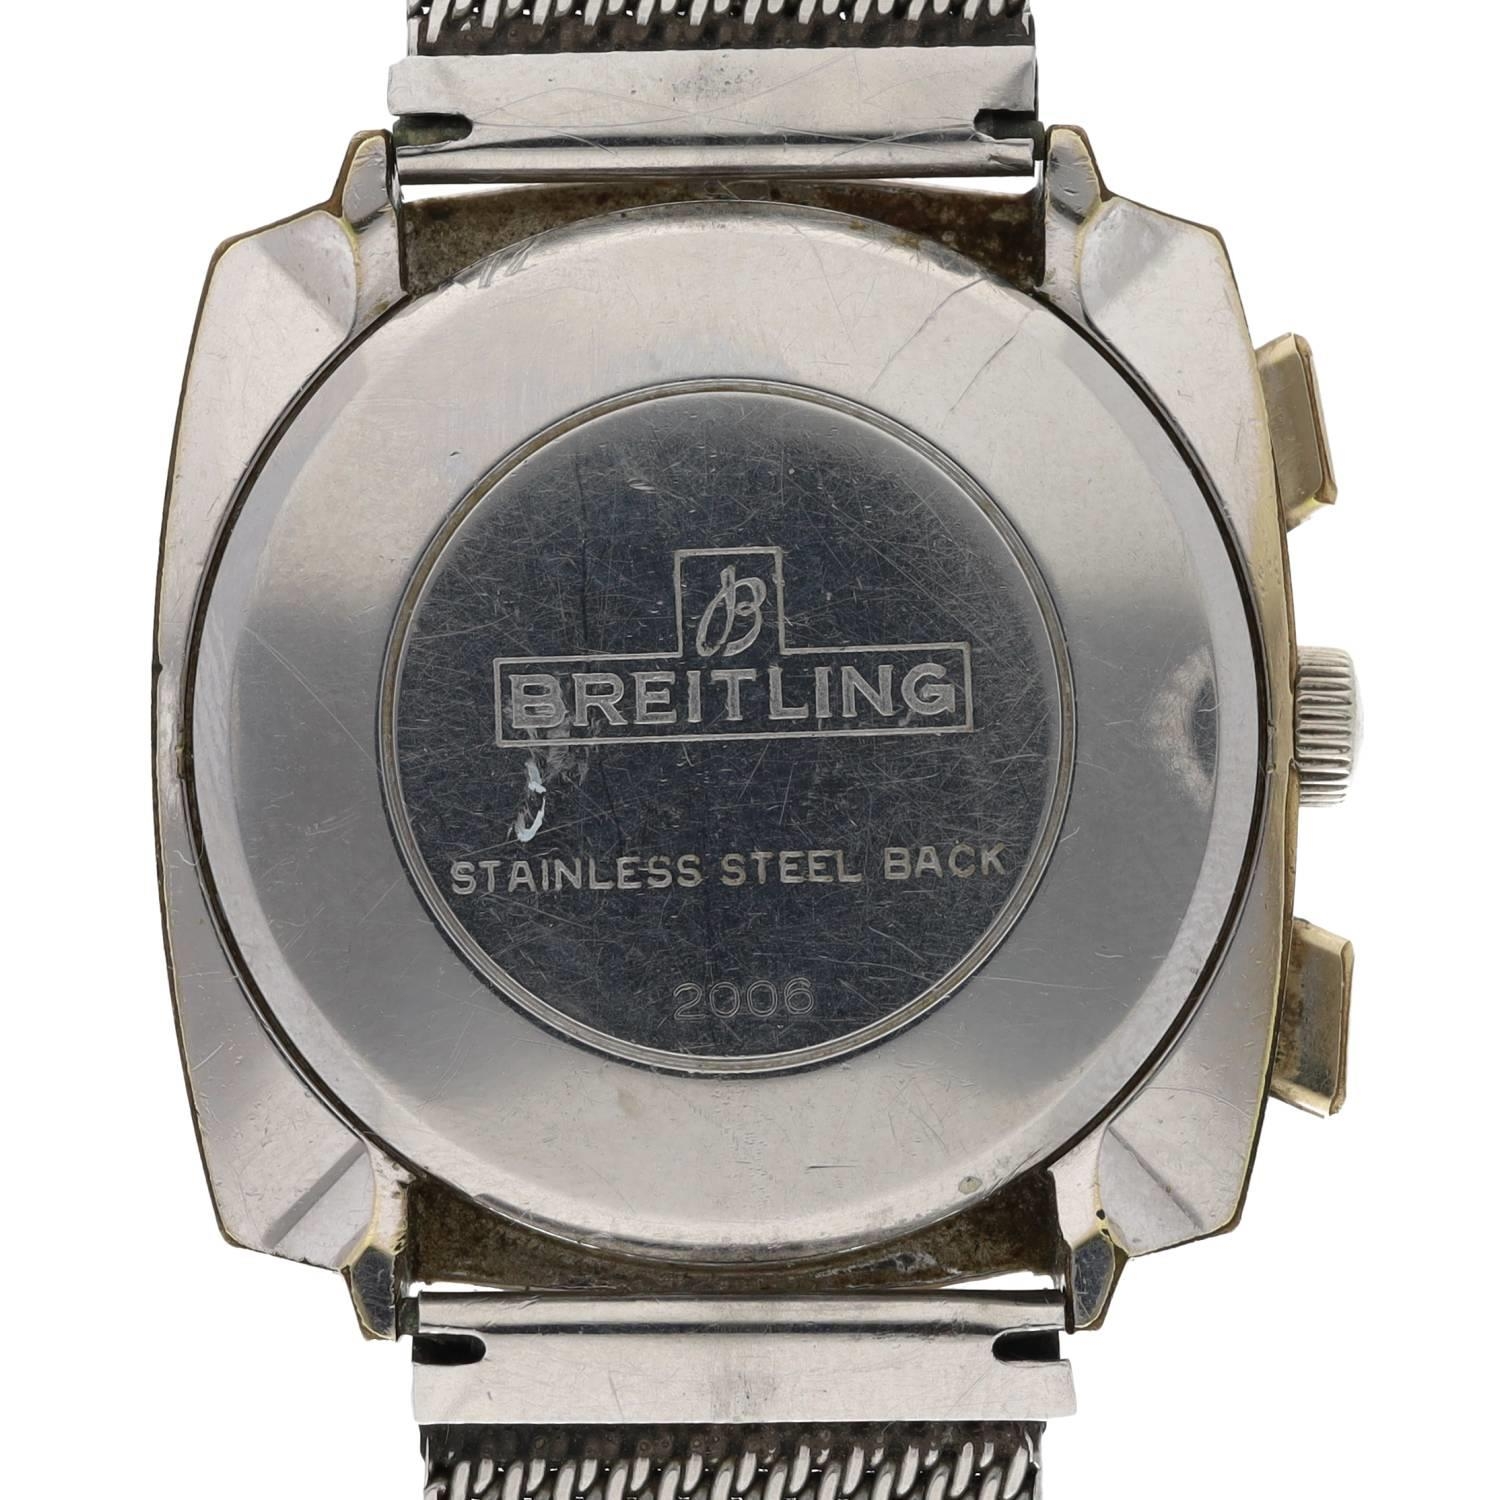 Breitling Top Time Chronograph gentleman's wristwatch, reference 2006, serial no. 1133xxx, circa - Image 2 of 2